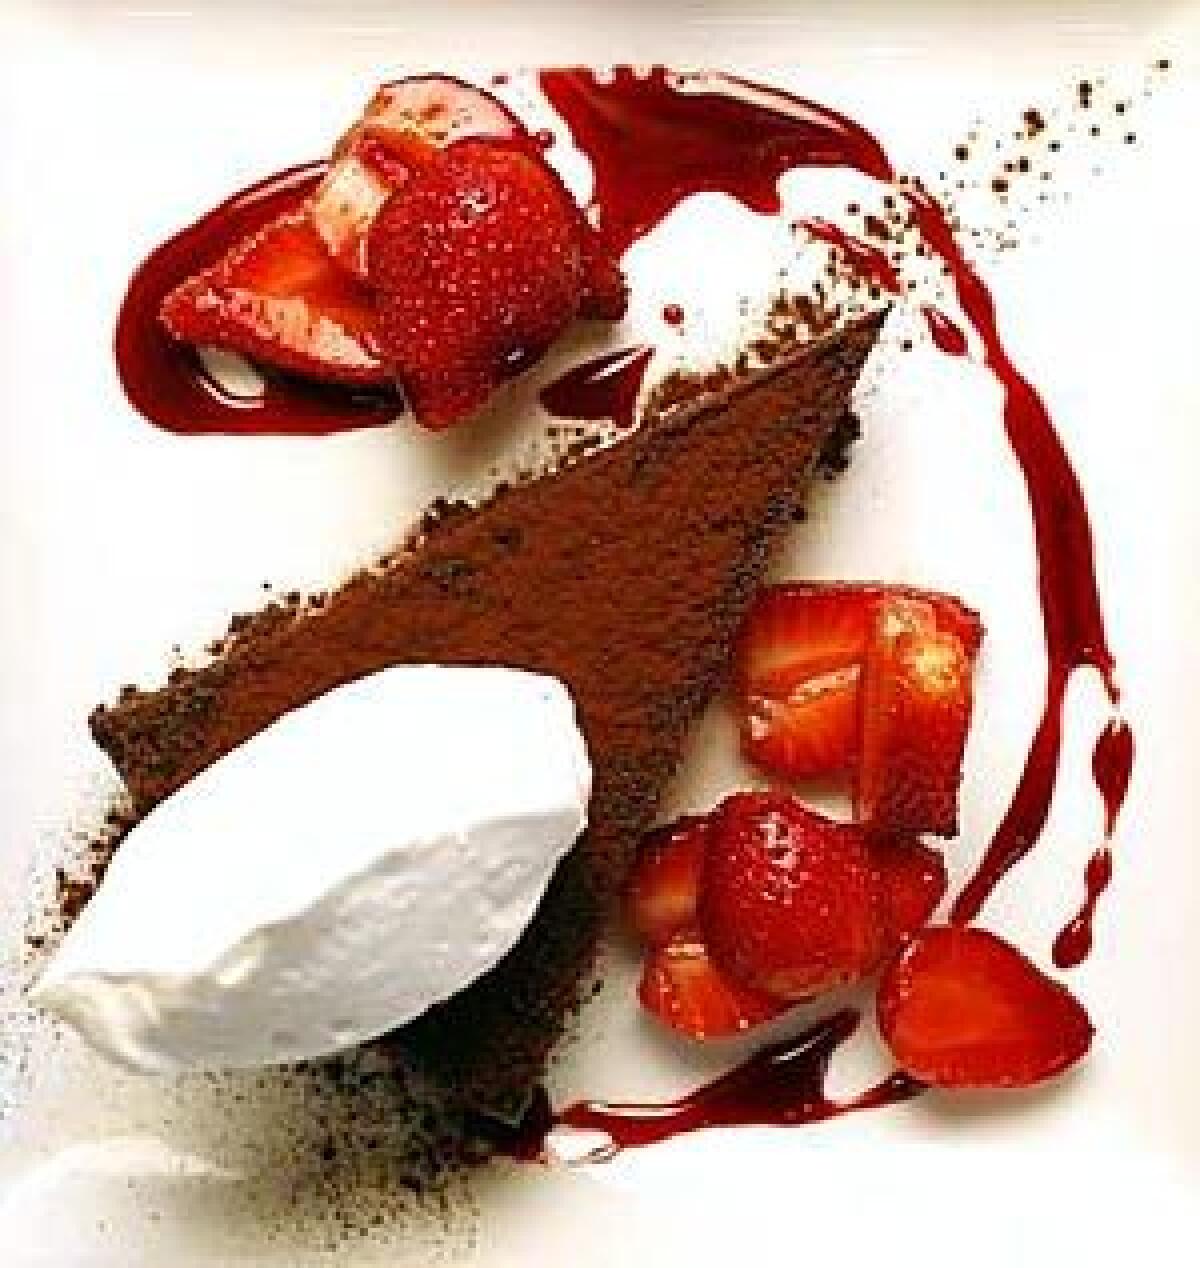 CELEBRATE: Elegant flourless chocolate cake is topped with Zinfandel-macerated local strawberries and kosher whipped nondairy cream.